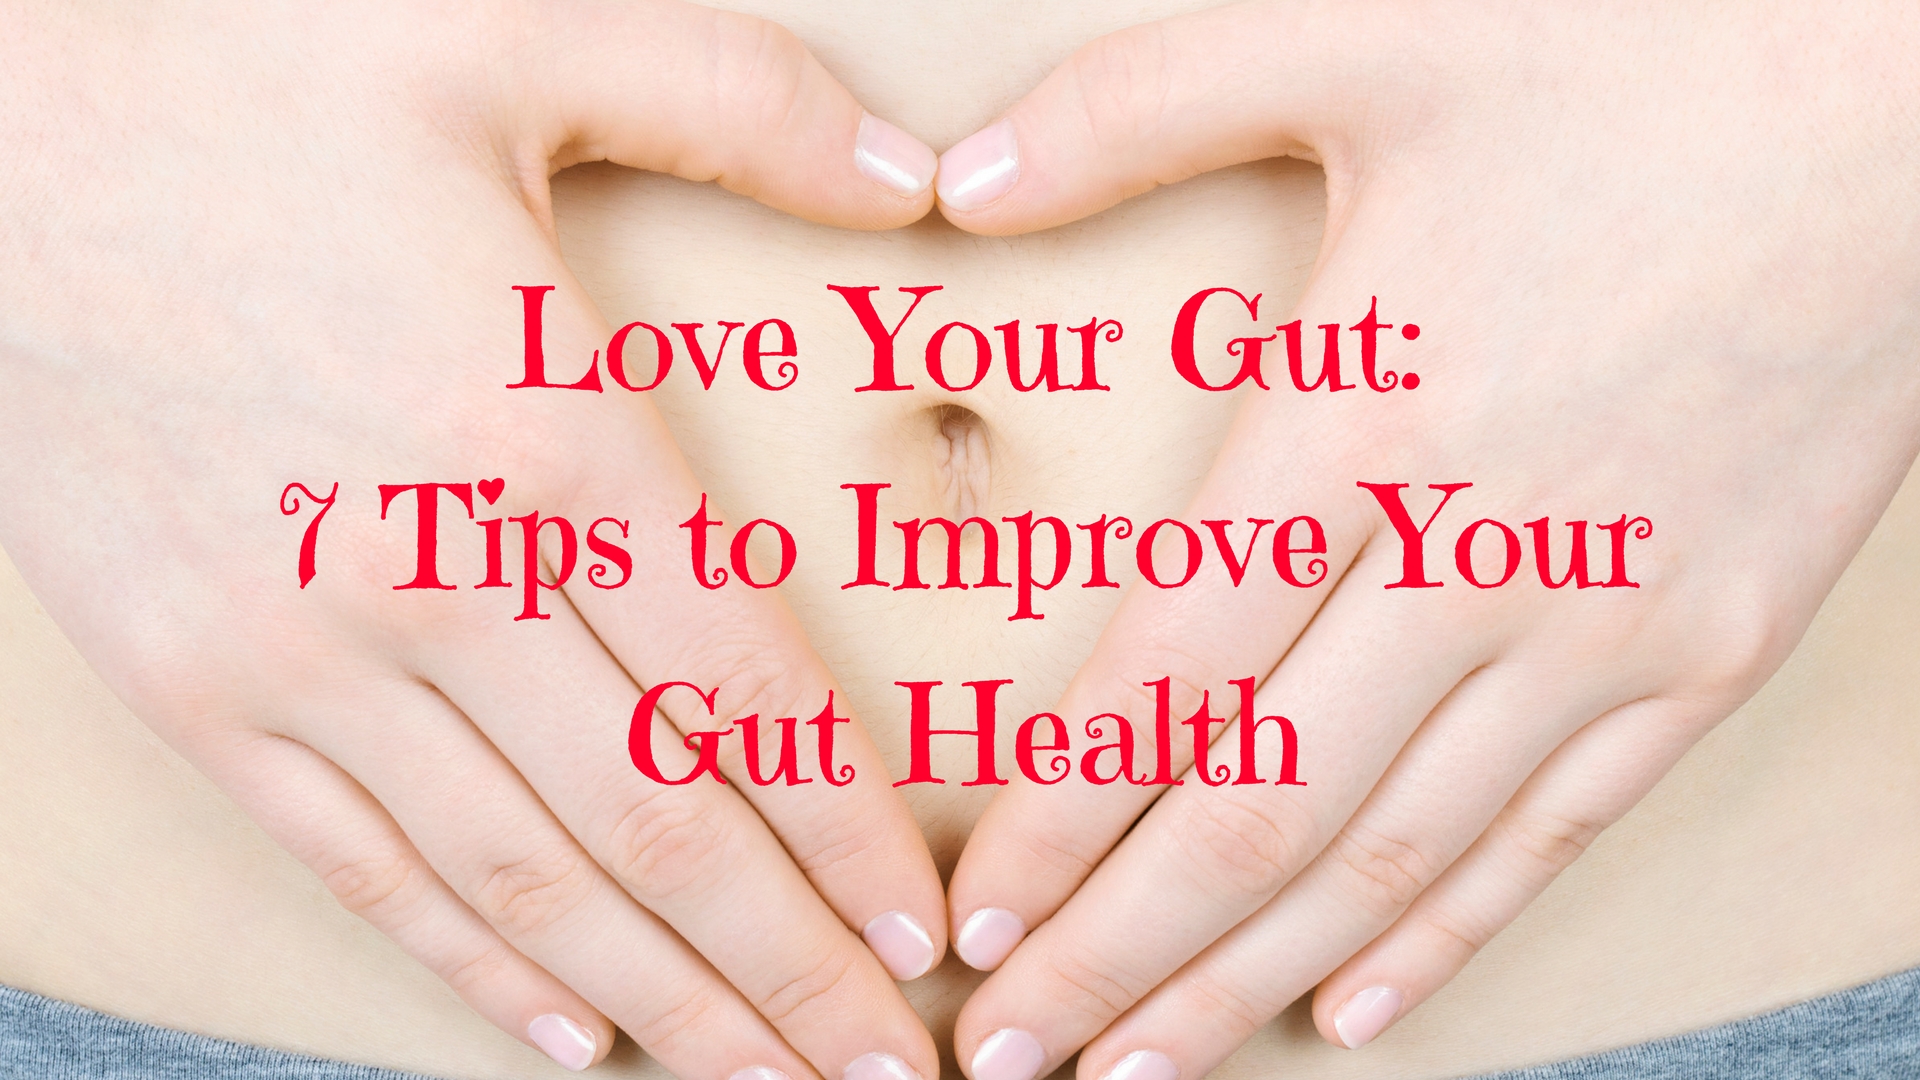 Love Your Gut: 7 Tips to Improve Your Gut Health